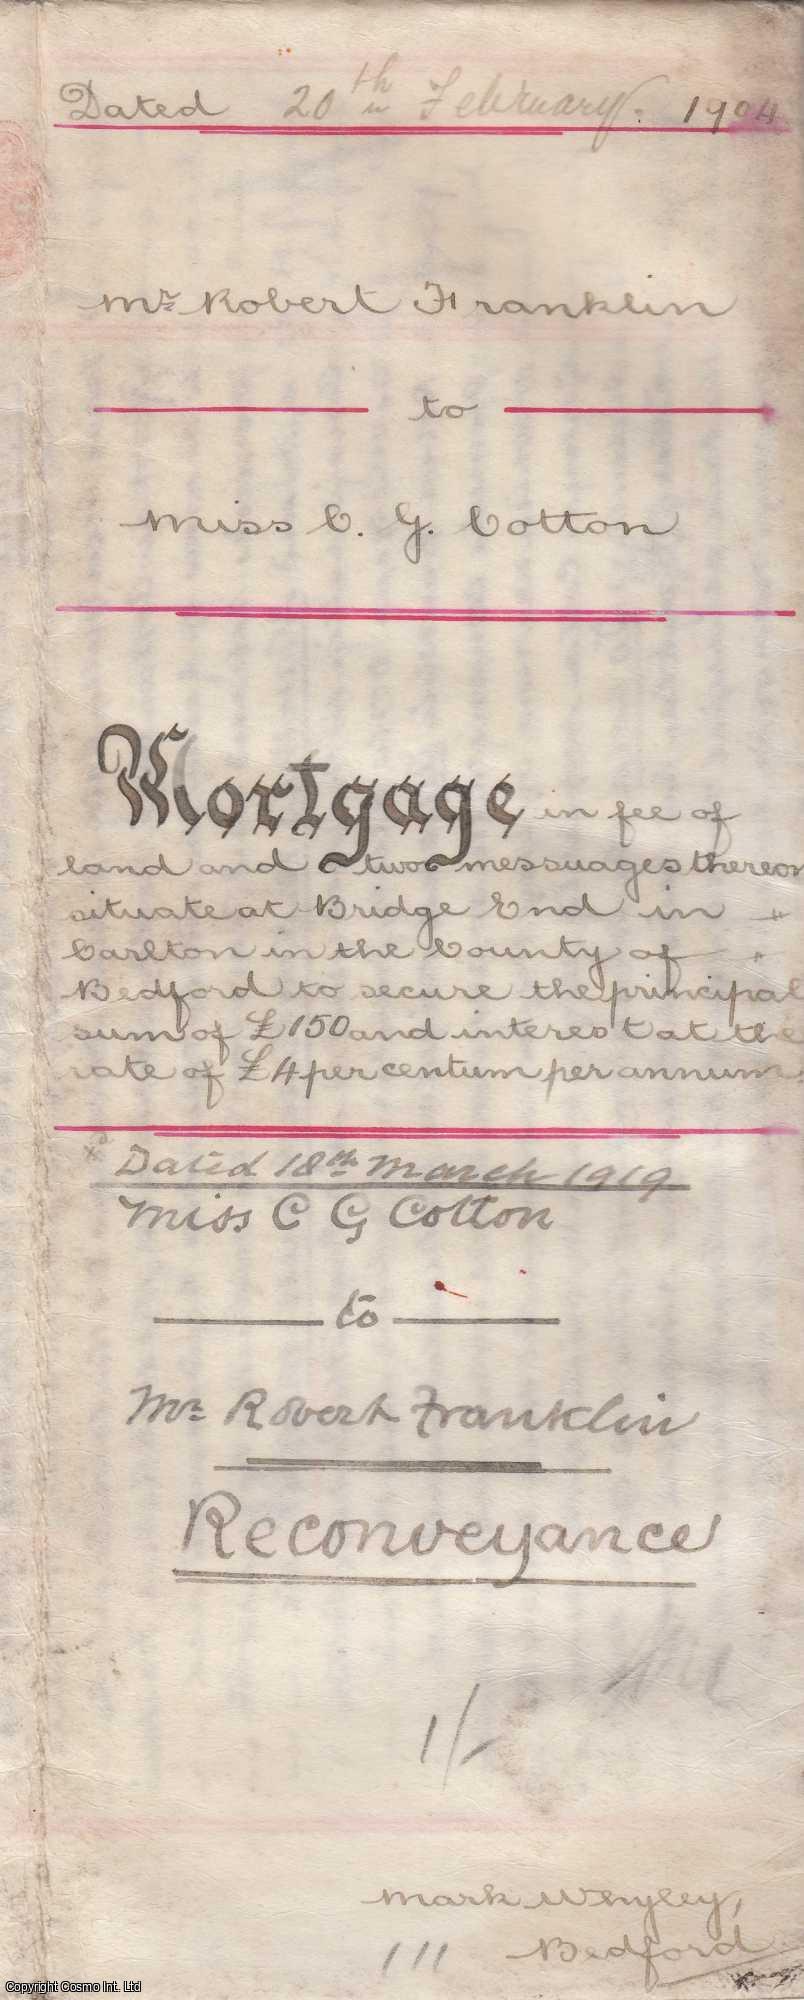 1904 Mortgage Carlton, Bedfordshire - 1904 Mortgage of land and two houses at Bridge End in Carlton Bedfordshire; from Mr Robert Franklin to Miss Charlotte Gertrude Cotton. Also a reverse re-conveyance in 1919. Four page Indenture (10 x 16 inches) entirely handwritten with signatures, stamps and seals.